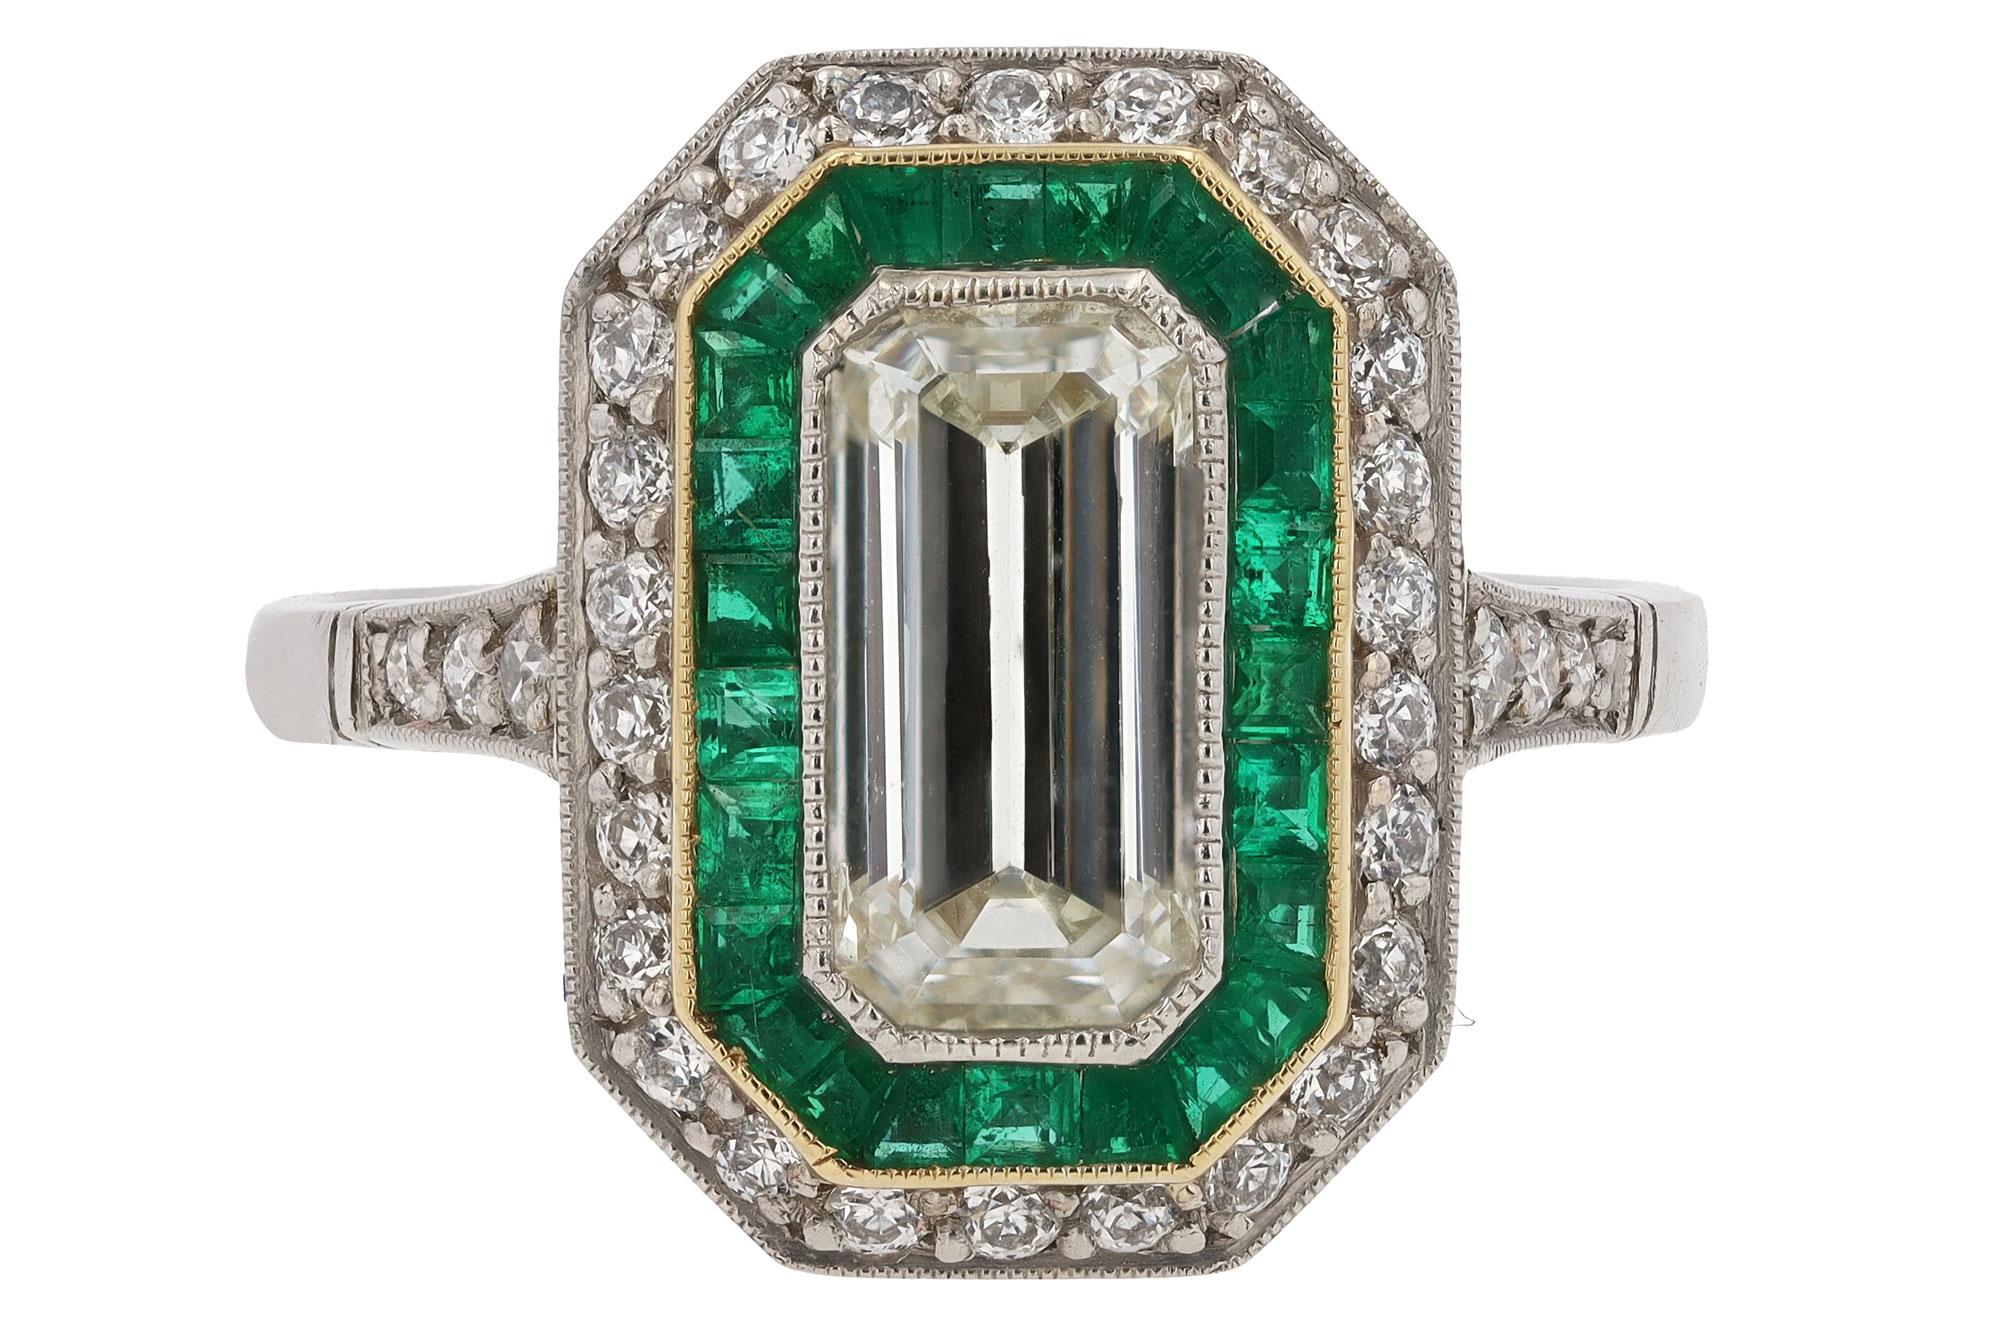 An enchanting Art Deco revival emerald cut diamond engagement ring. The sleek, geometric lines of the octagonal shape evoke jazz age architecture and is enhanced by a halo of French & calibré cut lush green emeralds surrounded by a yellow gold